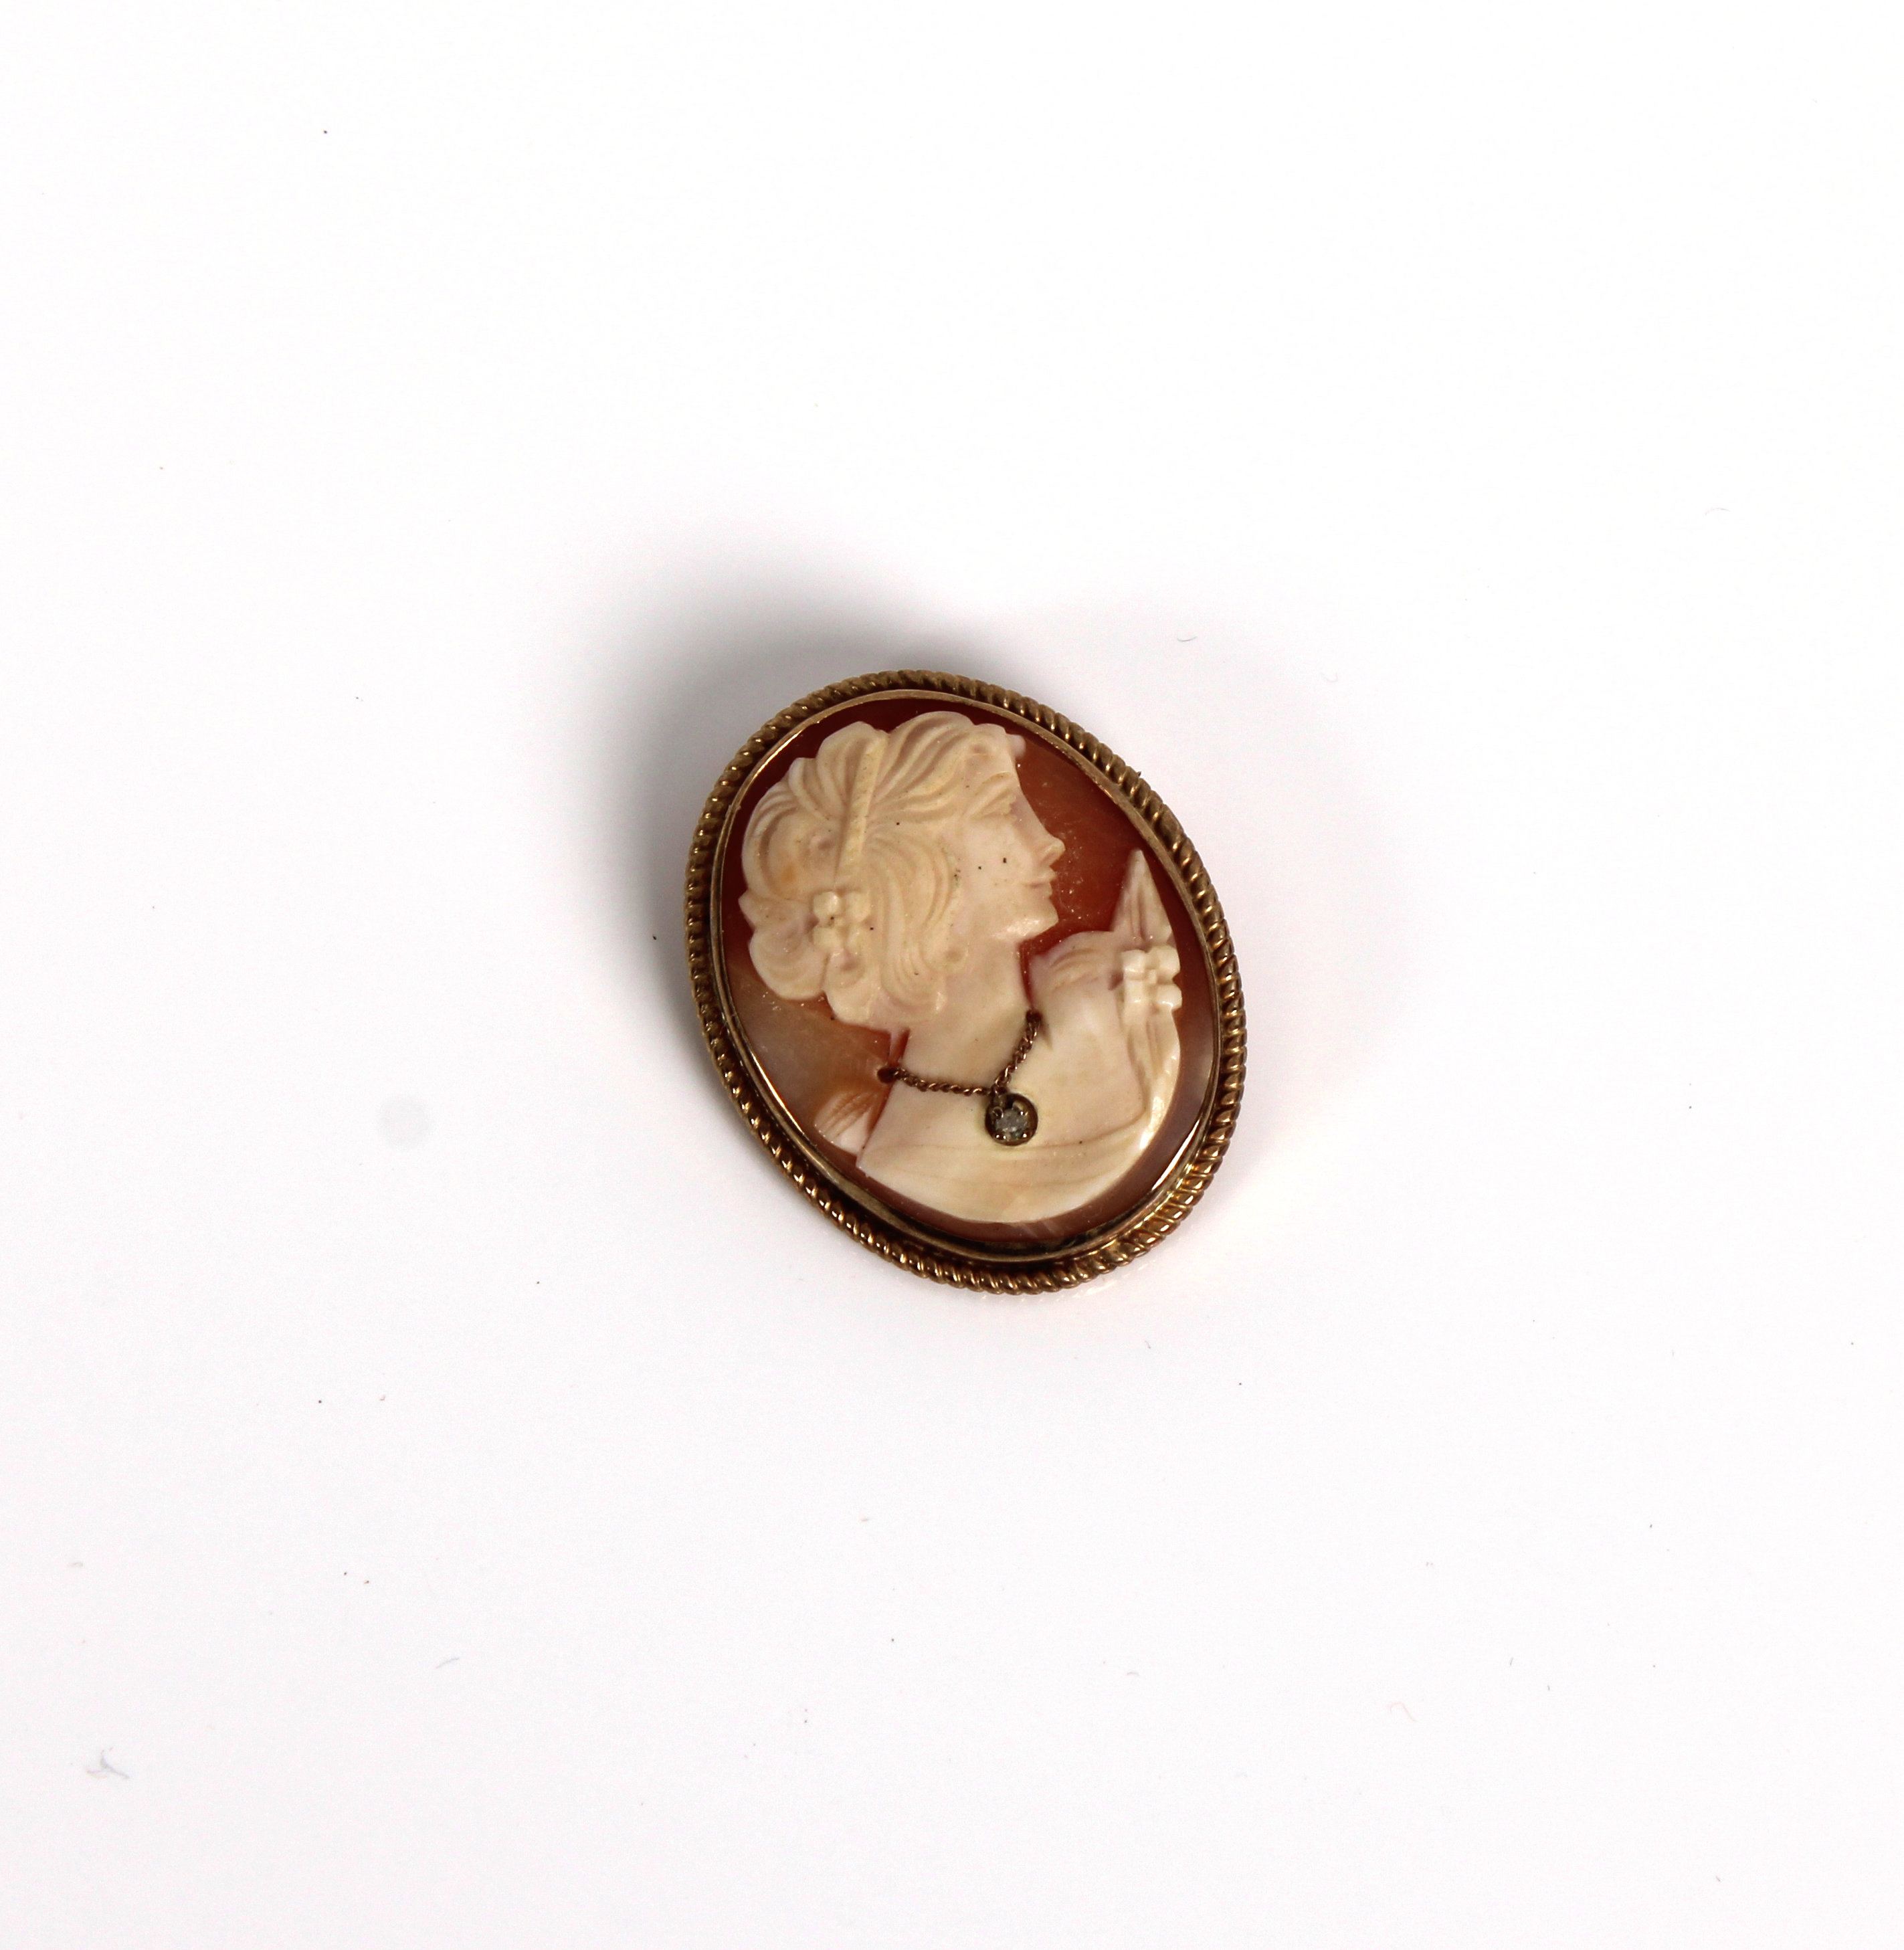 An unusual Victorian style 9ct gold shell cameo brooch depicting a young maiden